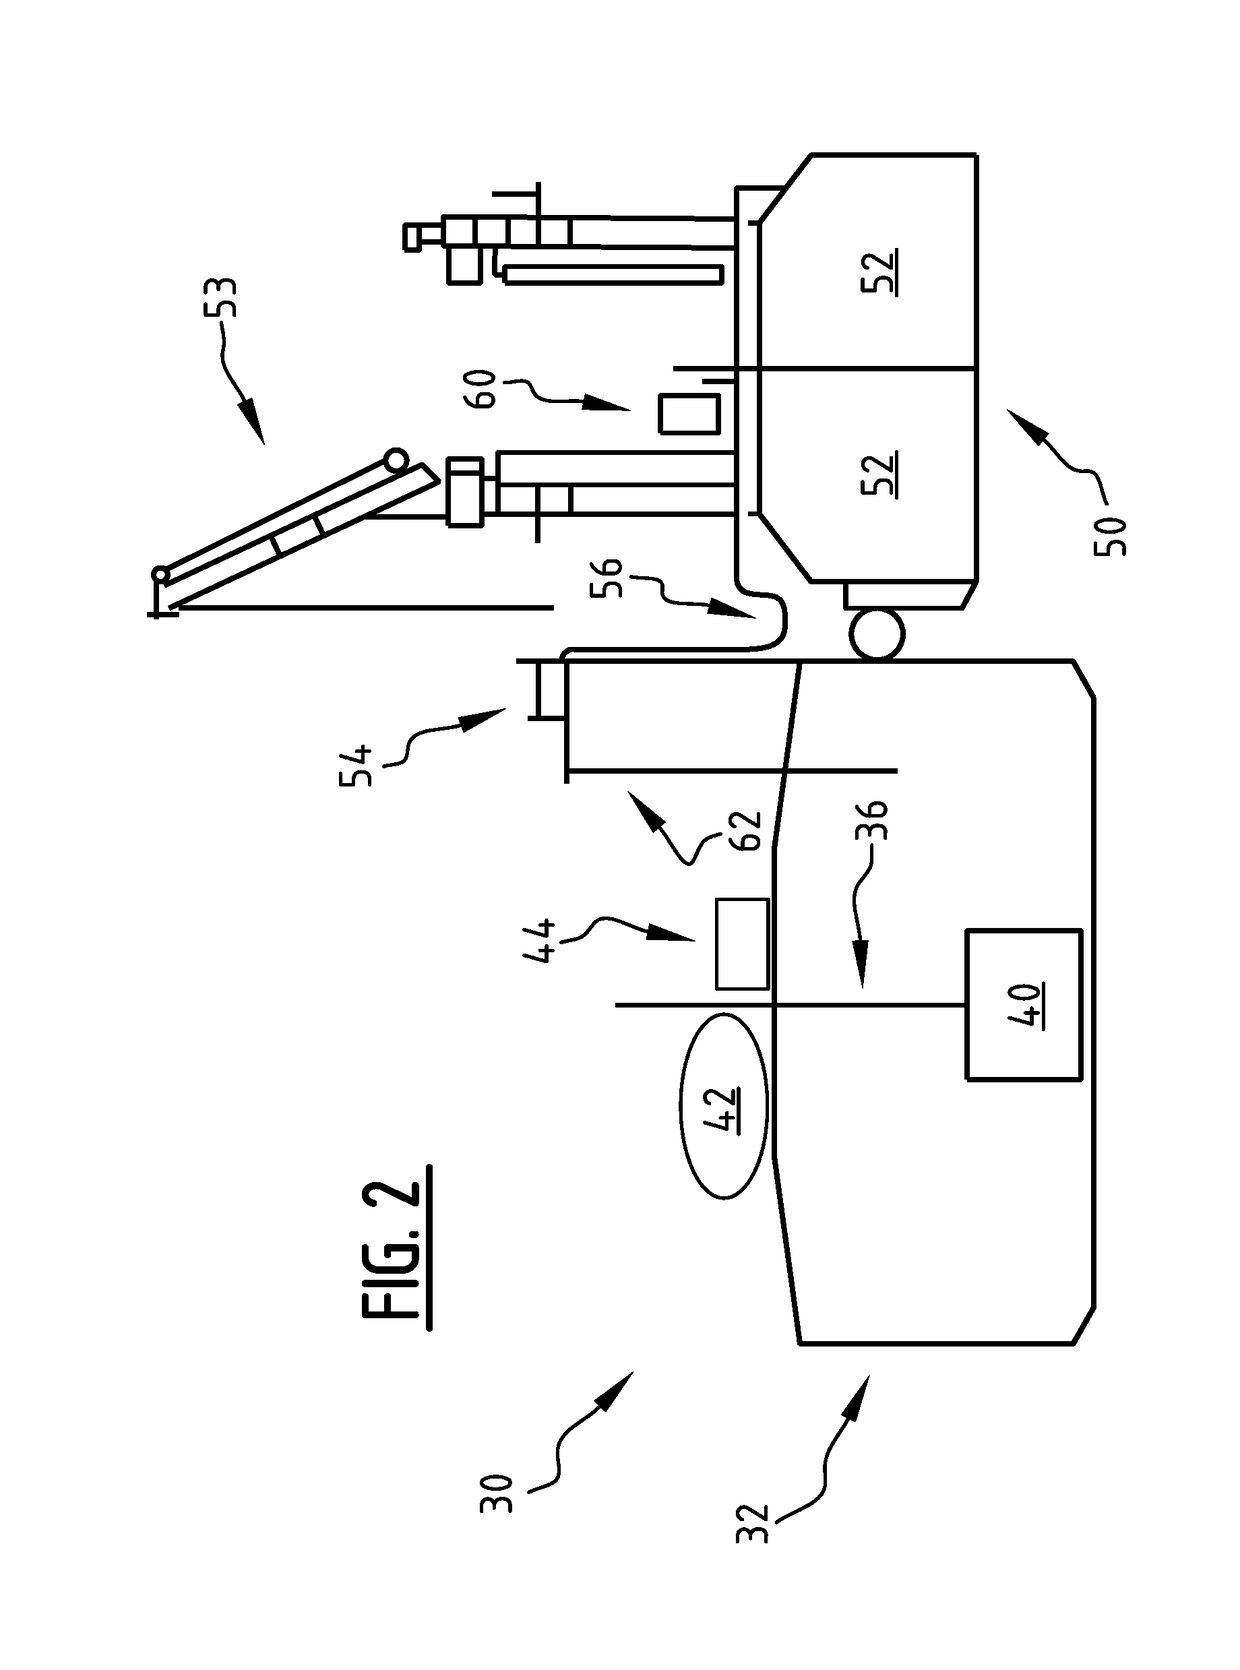 Liquefied fuel gas system and method